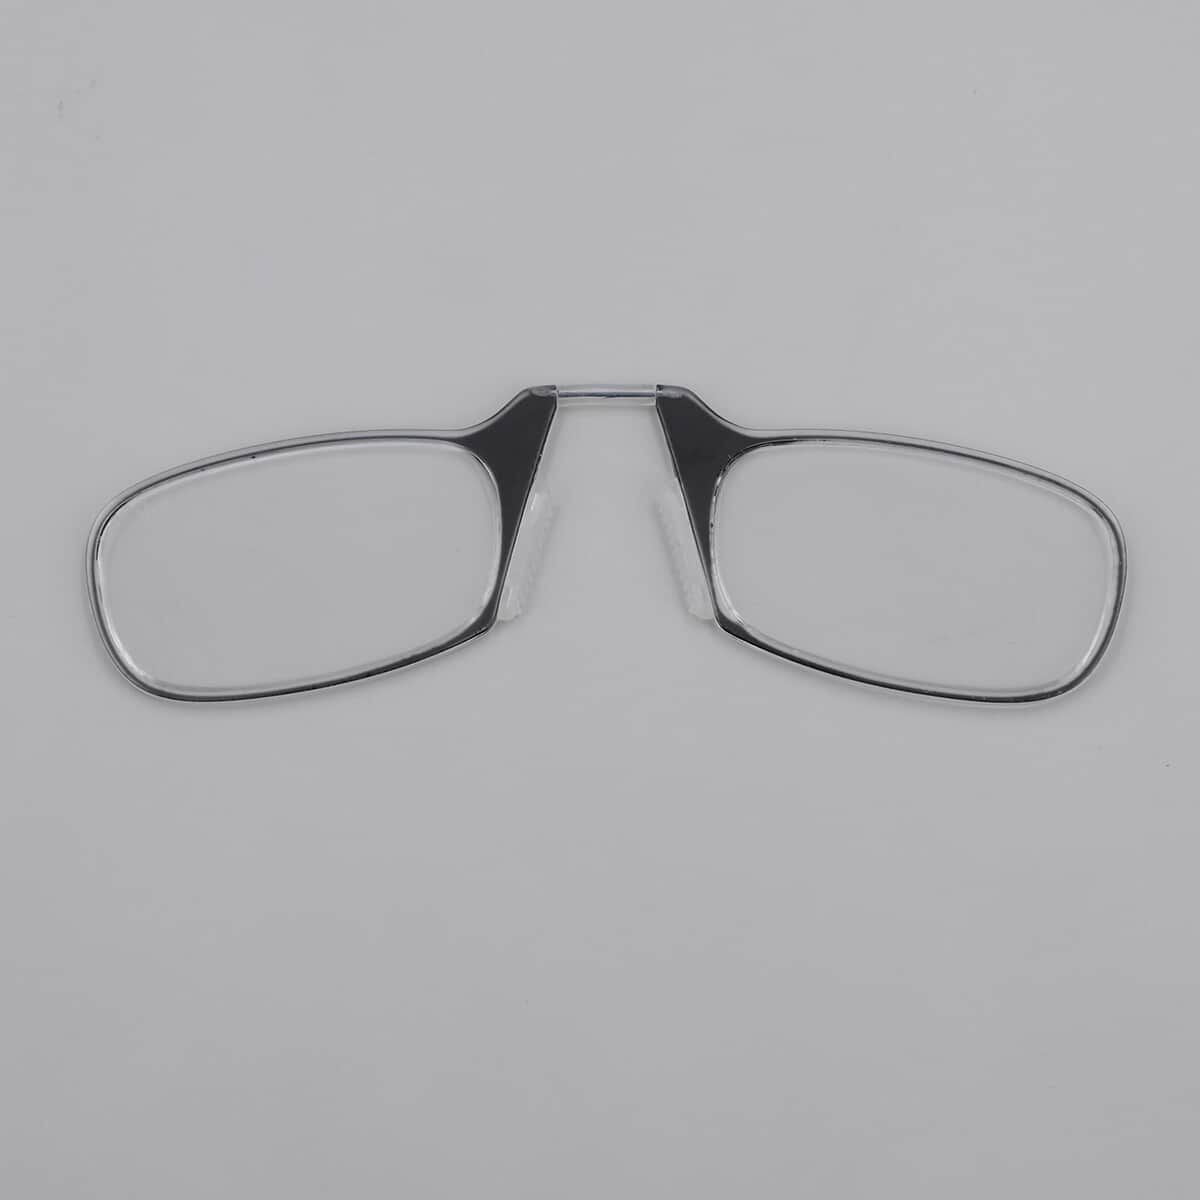 Feather Light Reading Glasses with a Flat Case - Black (Degree 1.0) image number 0